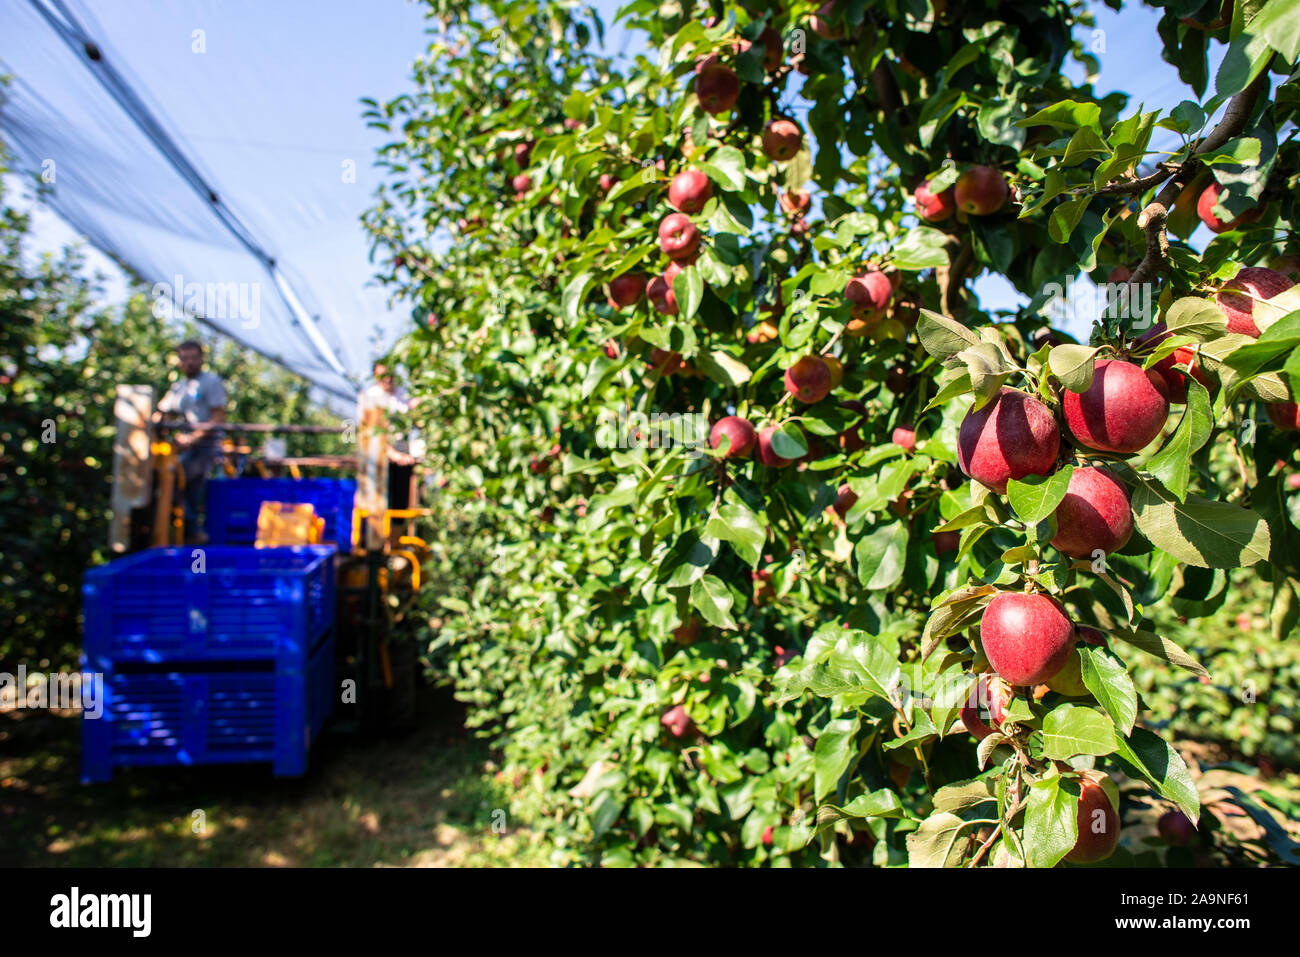 Harvest apples in big industrial apple orchard. Machine for picking apples. Concept for growing and harvesting apples through automatization. Sunny da Stock Photo